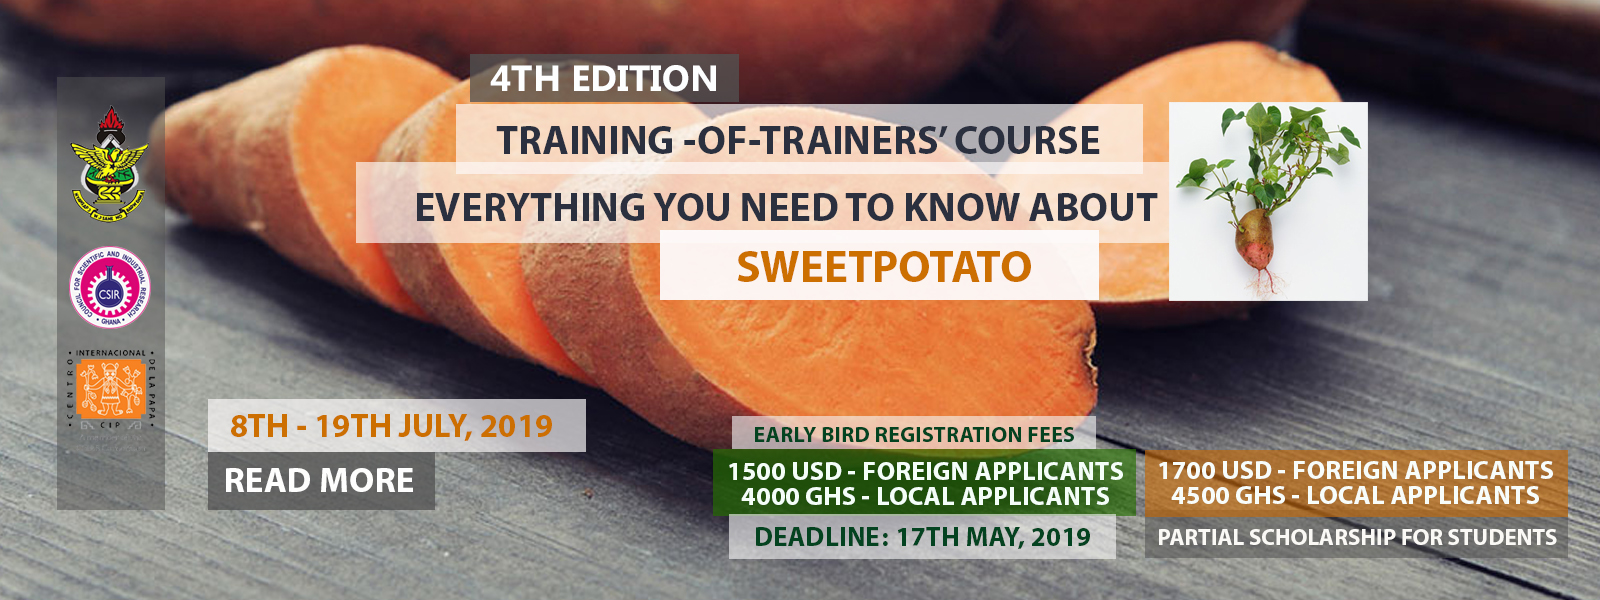 4th Edition of the Training-of-Trainers’ course: “Everything-you-need-to-know-about-Sweetpotato